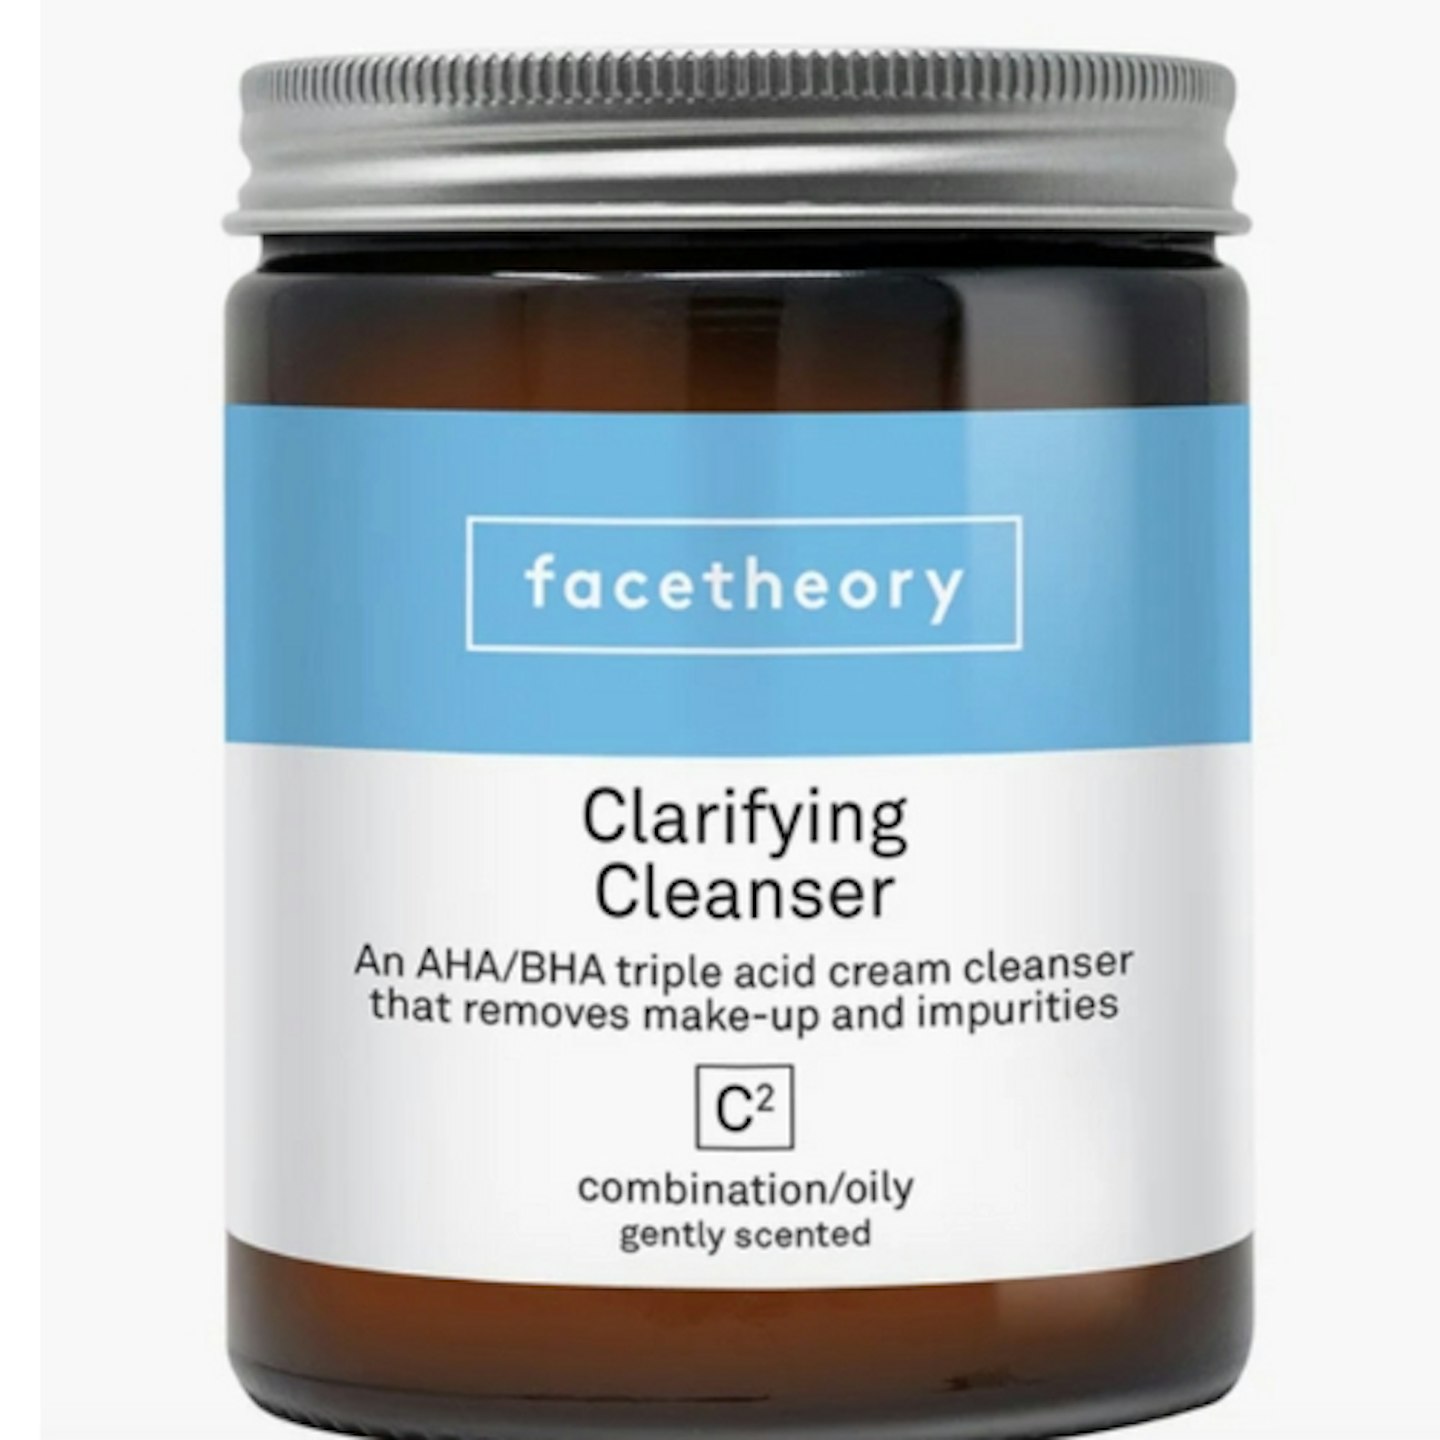 face theory Clarifying Cleanser C2 170ml